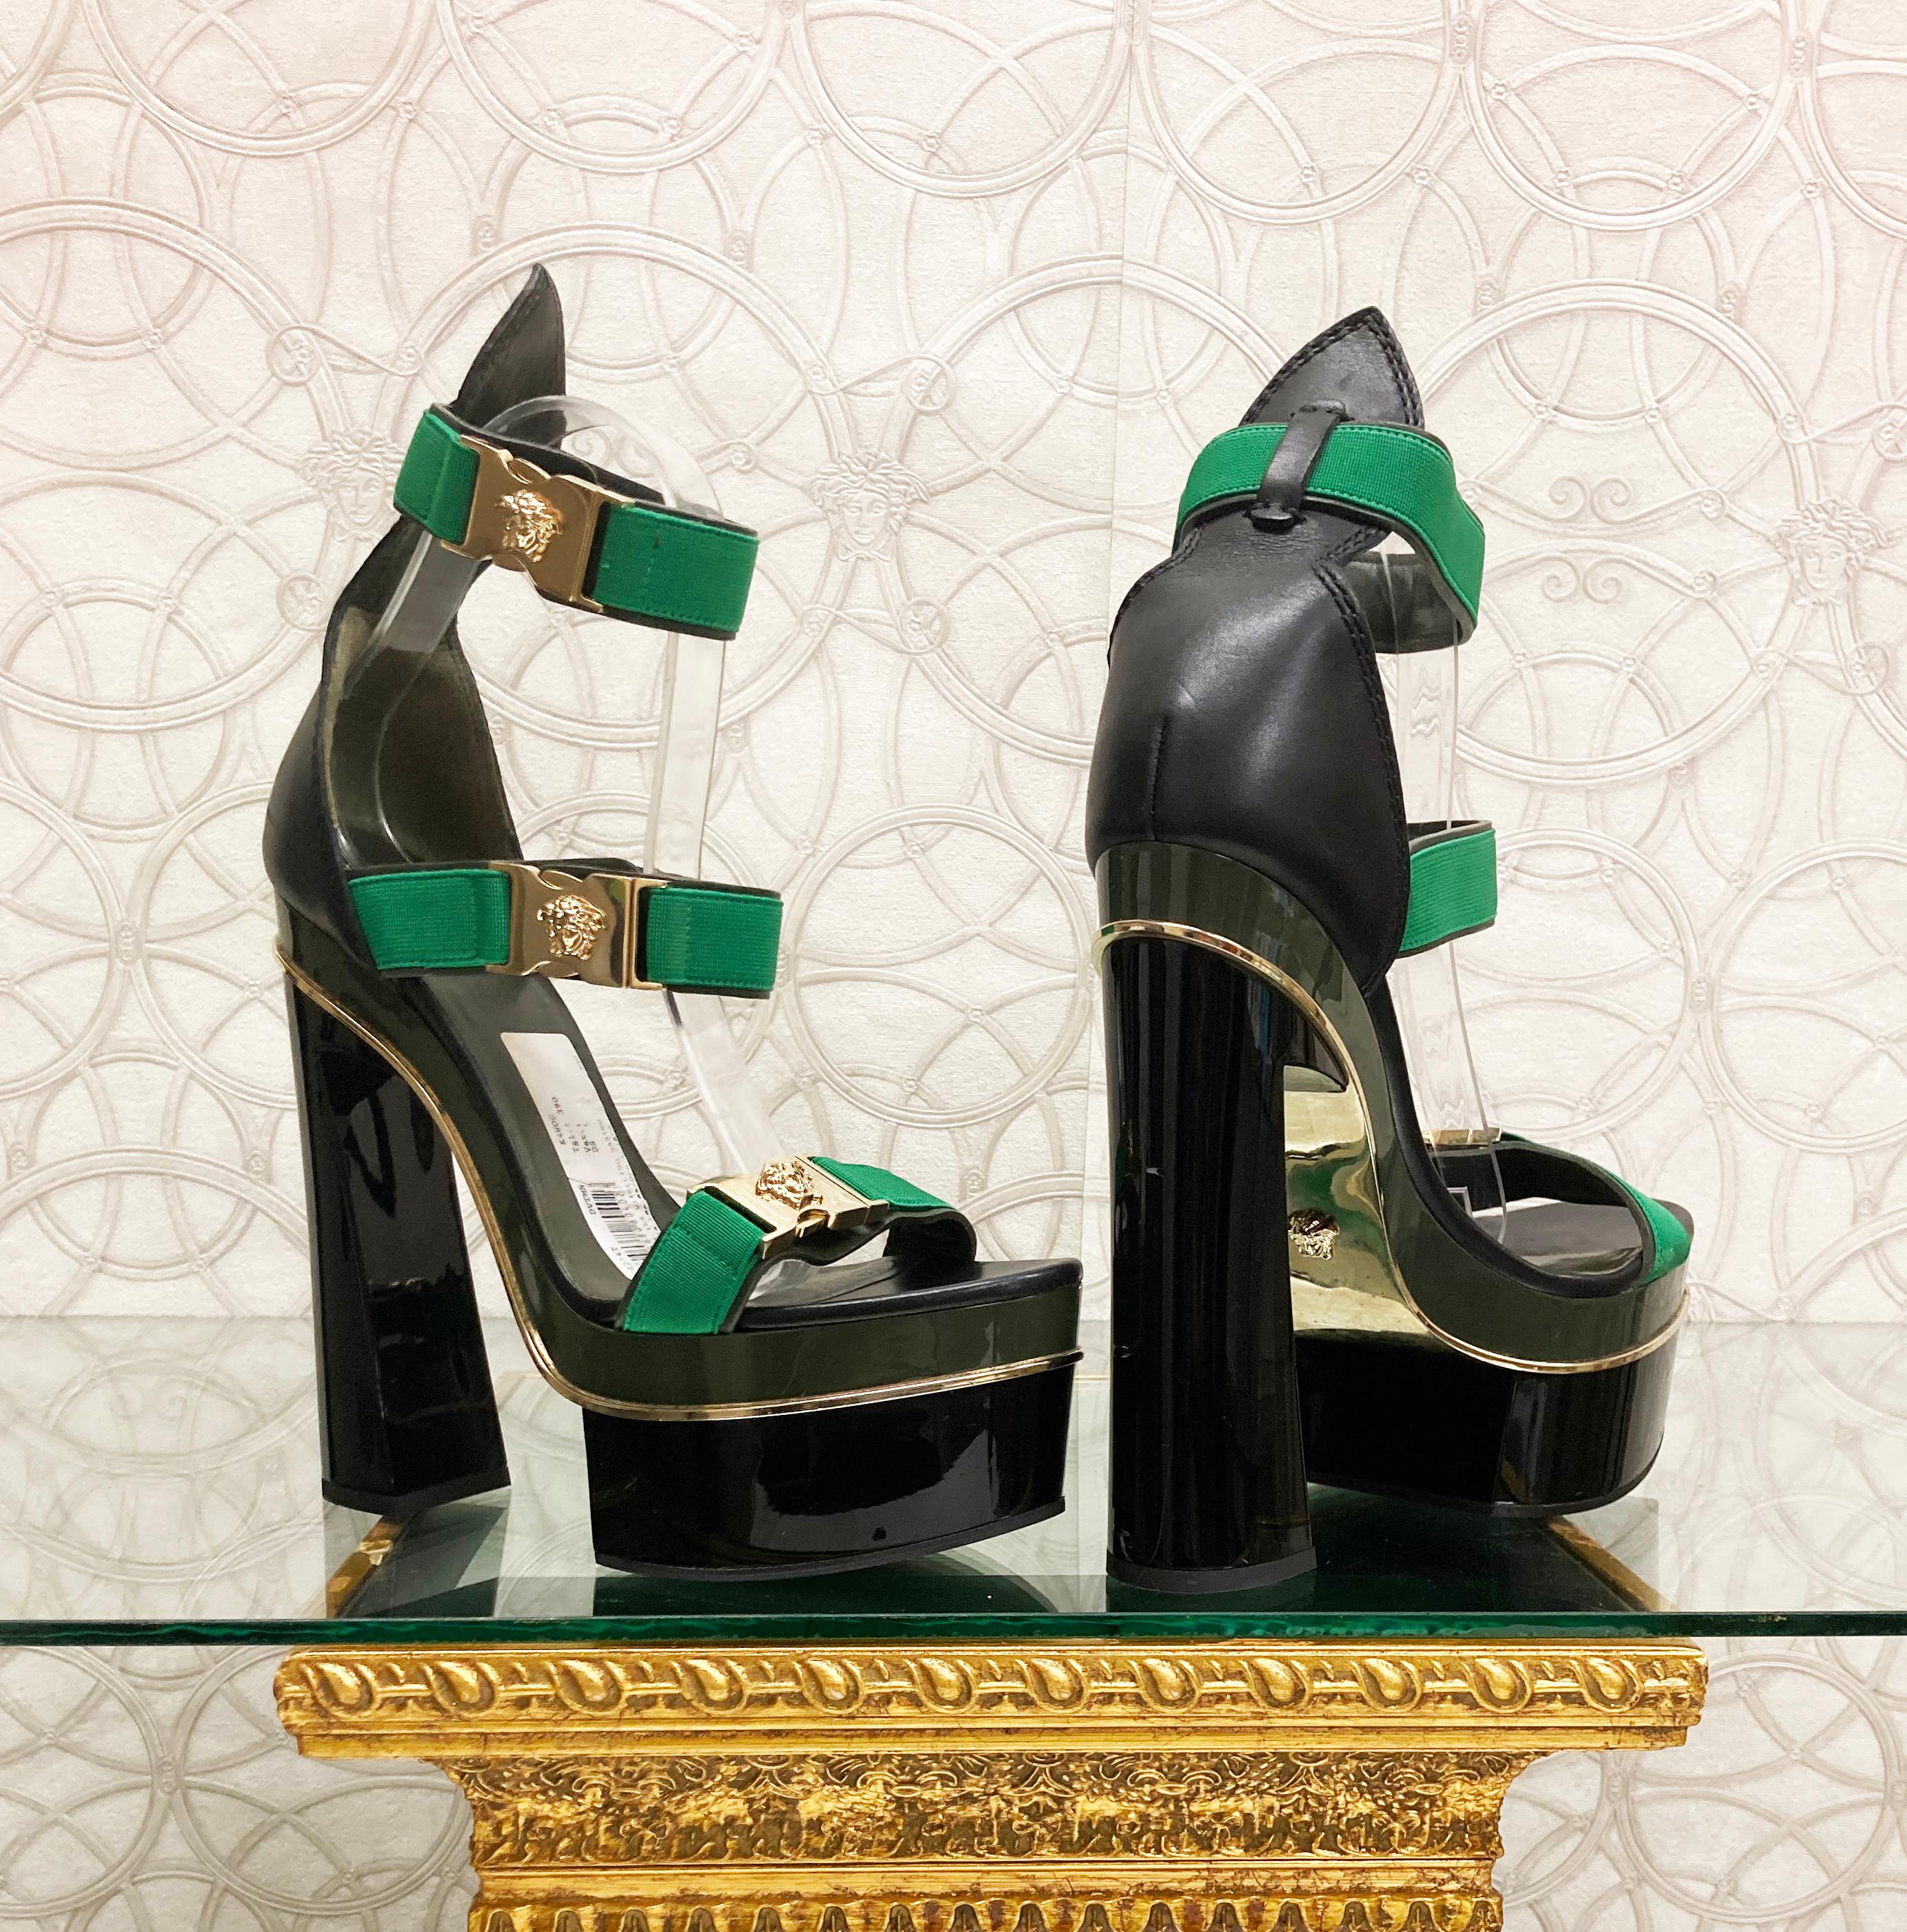 S/2016 L# 53 VERSACE GREEN PLATFORM SANDALS SHOES w/GOLD MEDUSA BUCKLES 39 - 9 In New Condition For Sale In Montgomery, TX